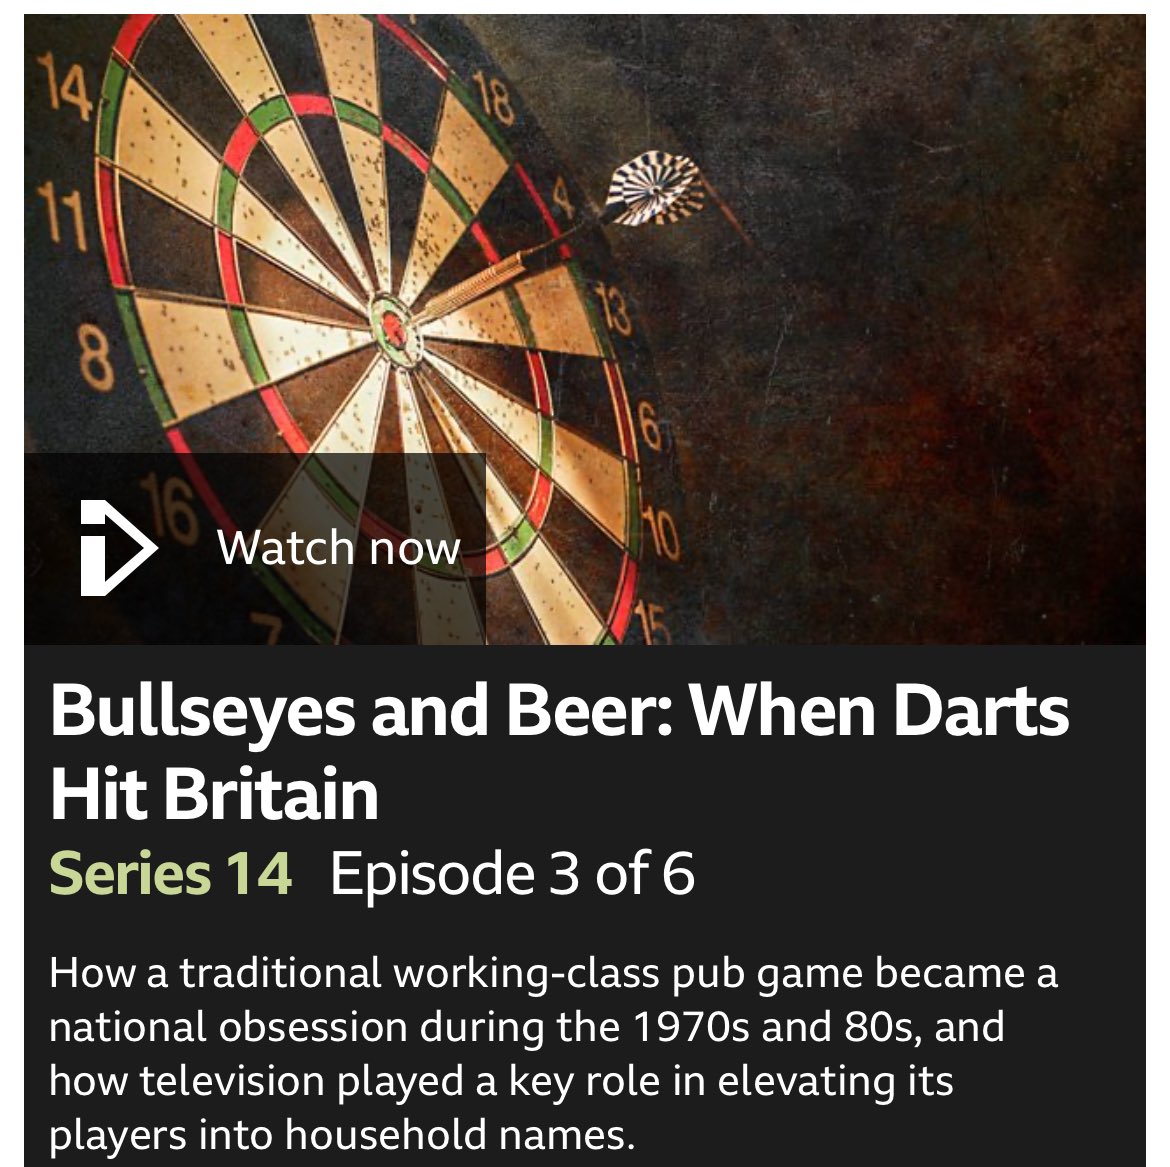 There's been lots of great archive darts shows on BBC Four this evening. 

The Bristow one starts at 10pm and the others should be on iPlayer